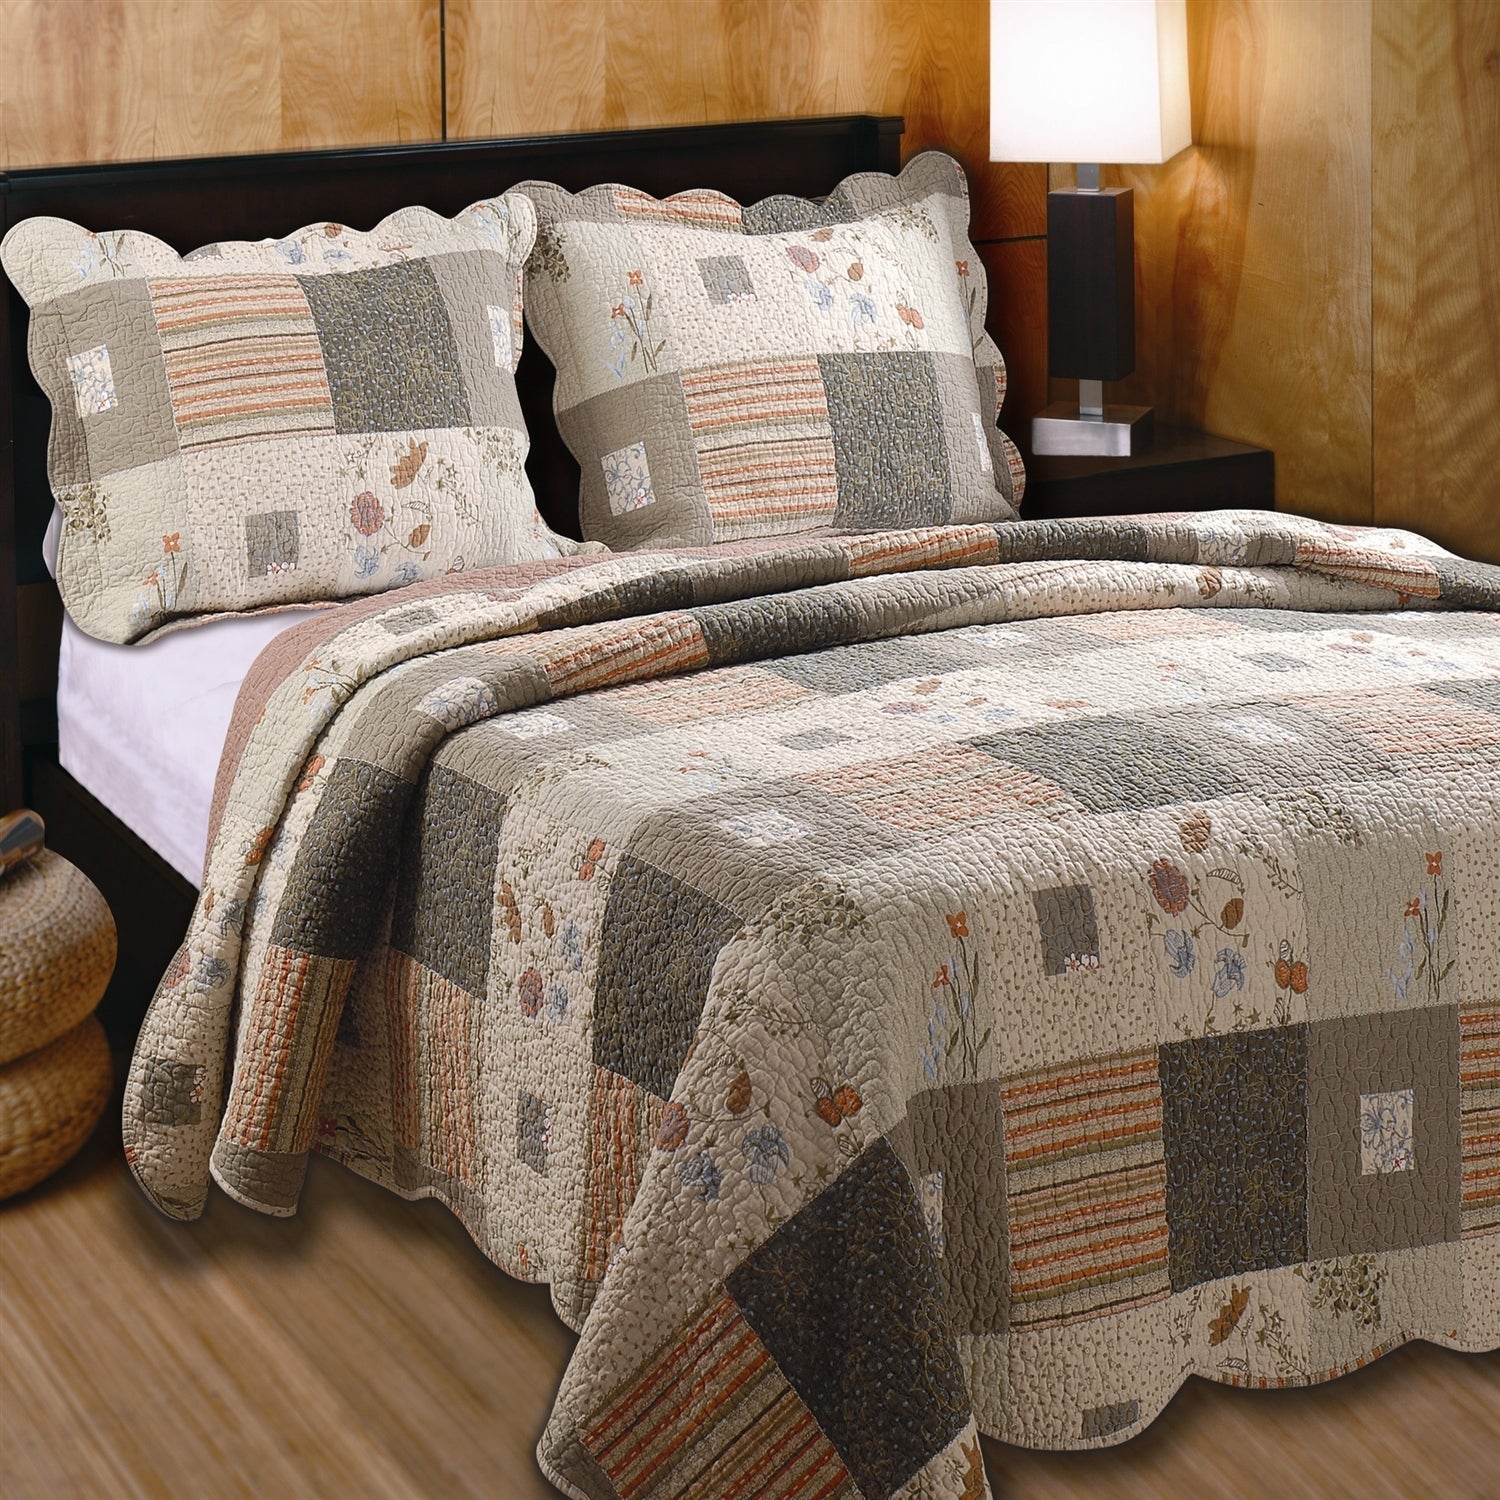 Bedroom > Quilts & Blankets - King Size Southwest Floral Quilt Set With Shams 100% Cotton